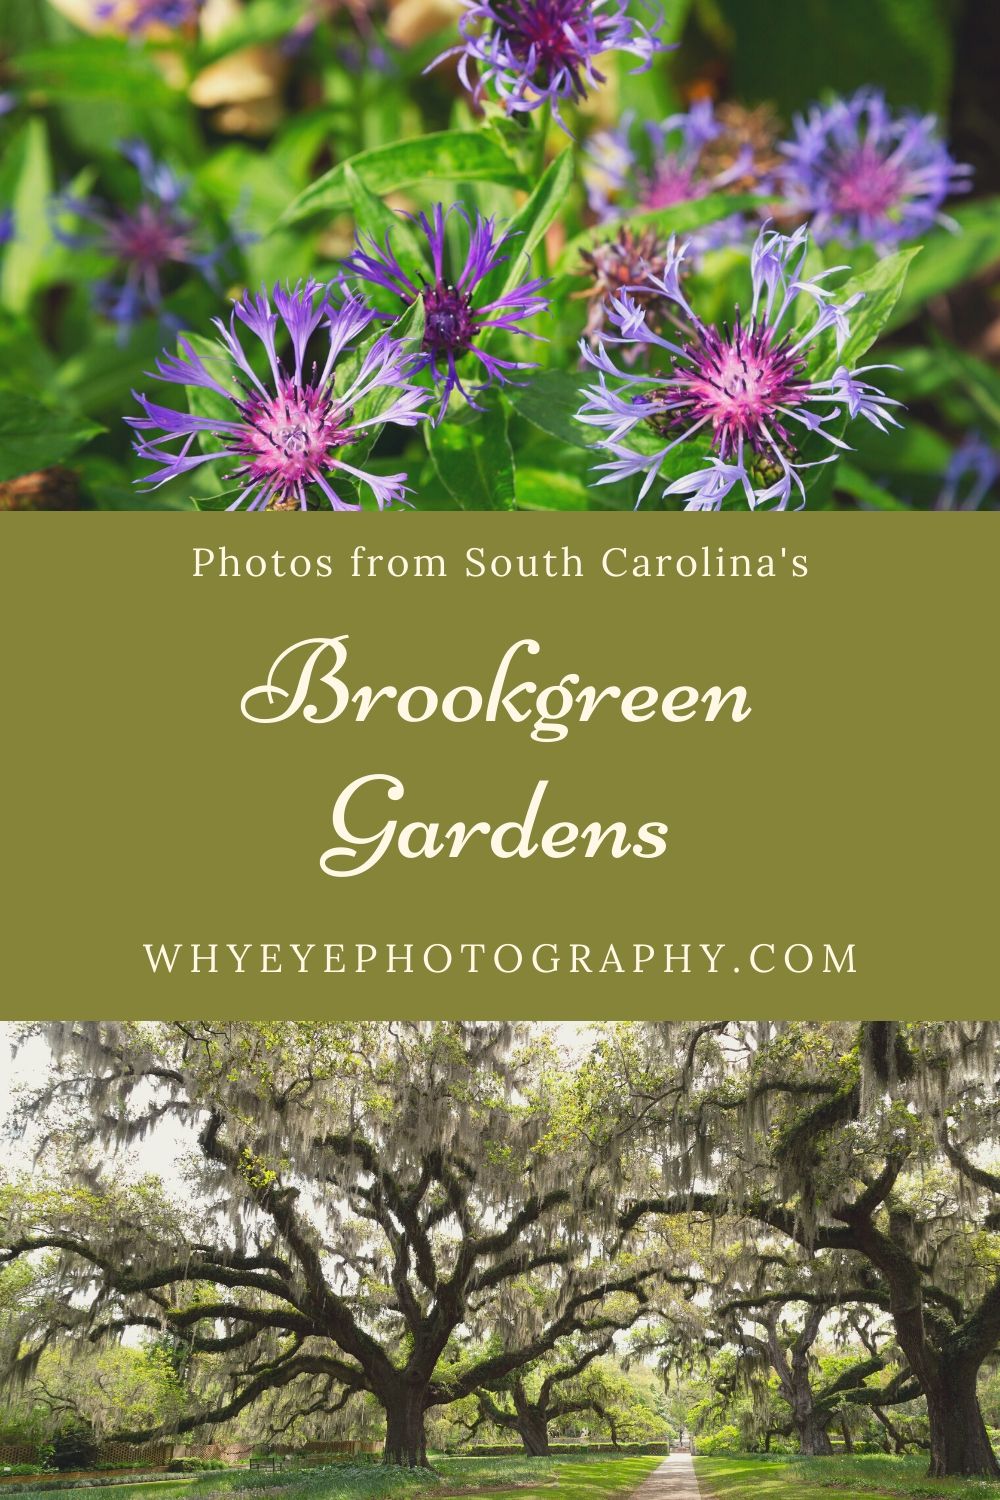 Pinterest pin for the whyeyephotography.com blog post about Brookgreen Gardens in South Carolina, USA